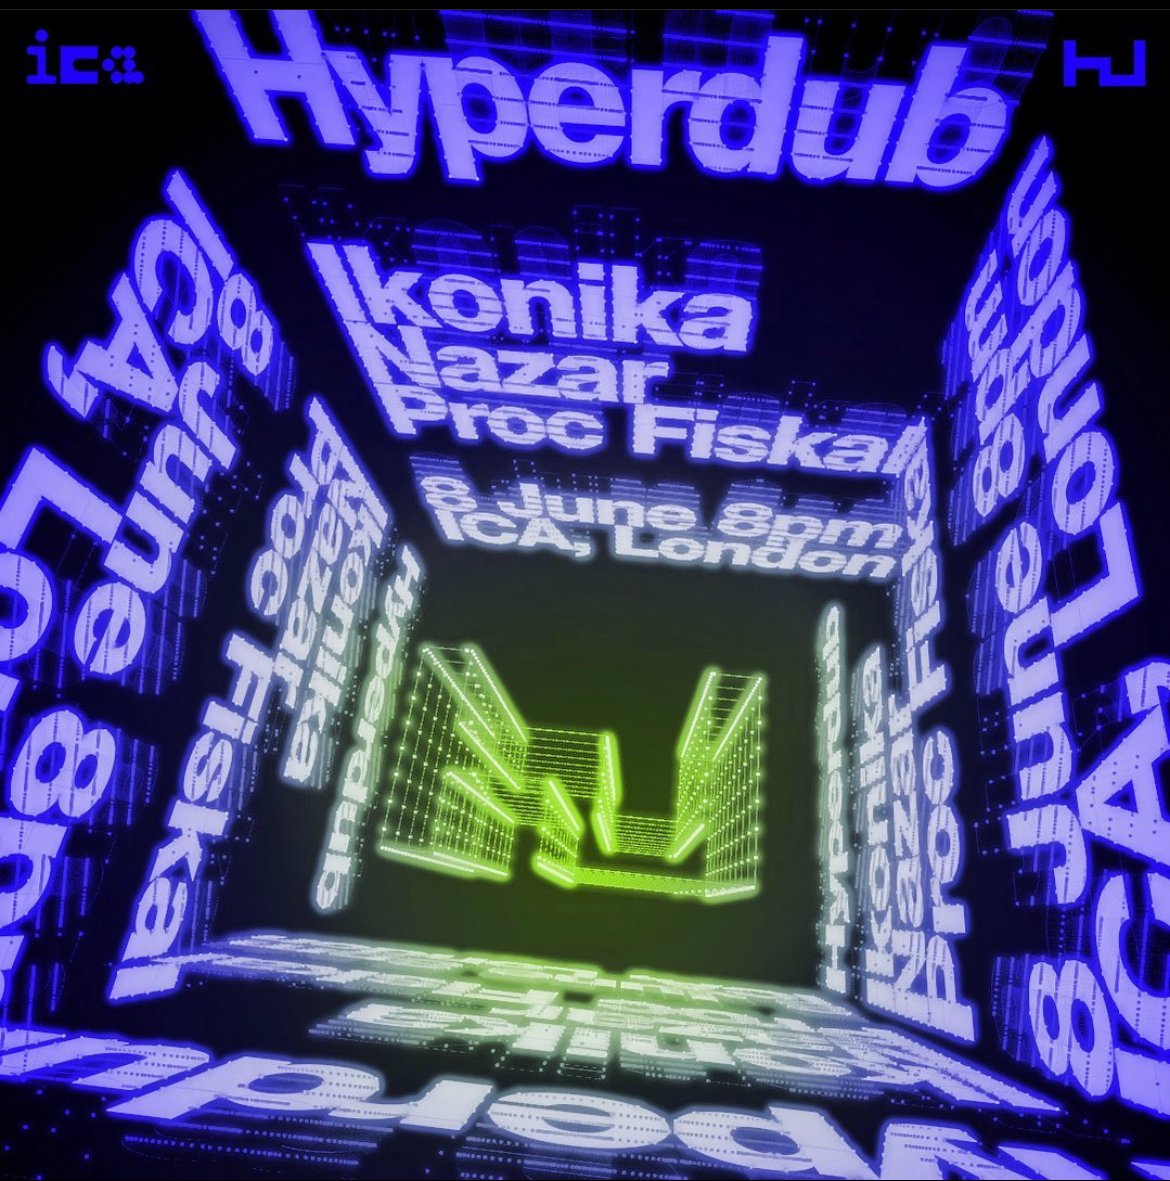 Thursday night at @ICALondon a live showcase including Ikonika's live London debut, and sets from @no_allies and @ProcFiskal ica.art/live/hyperdub